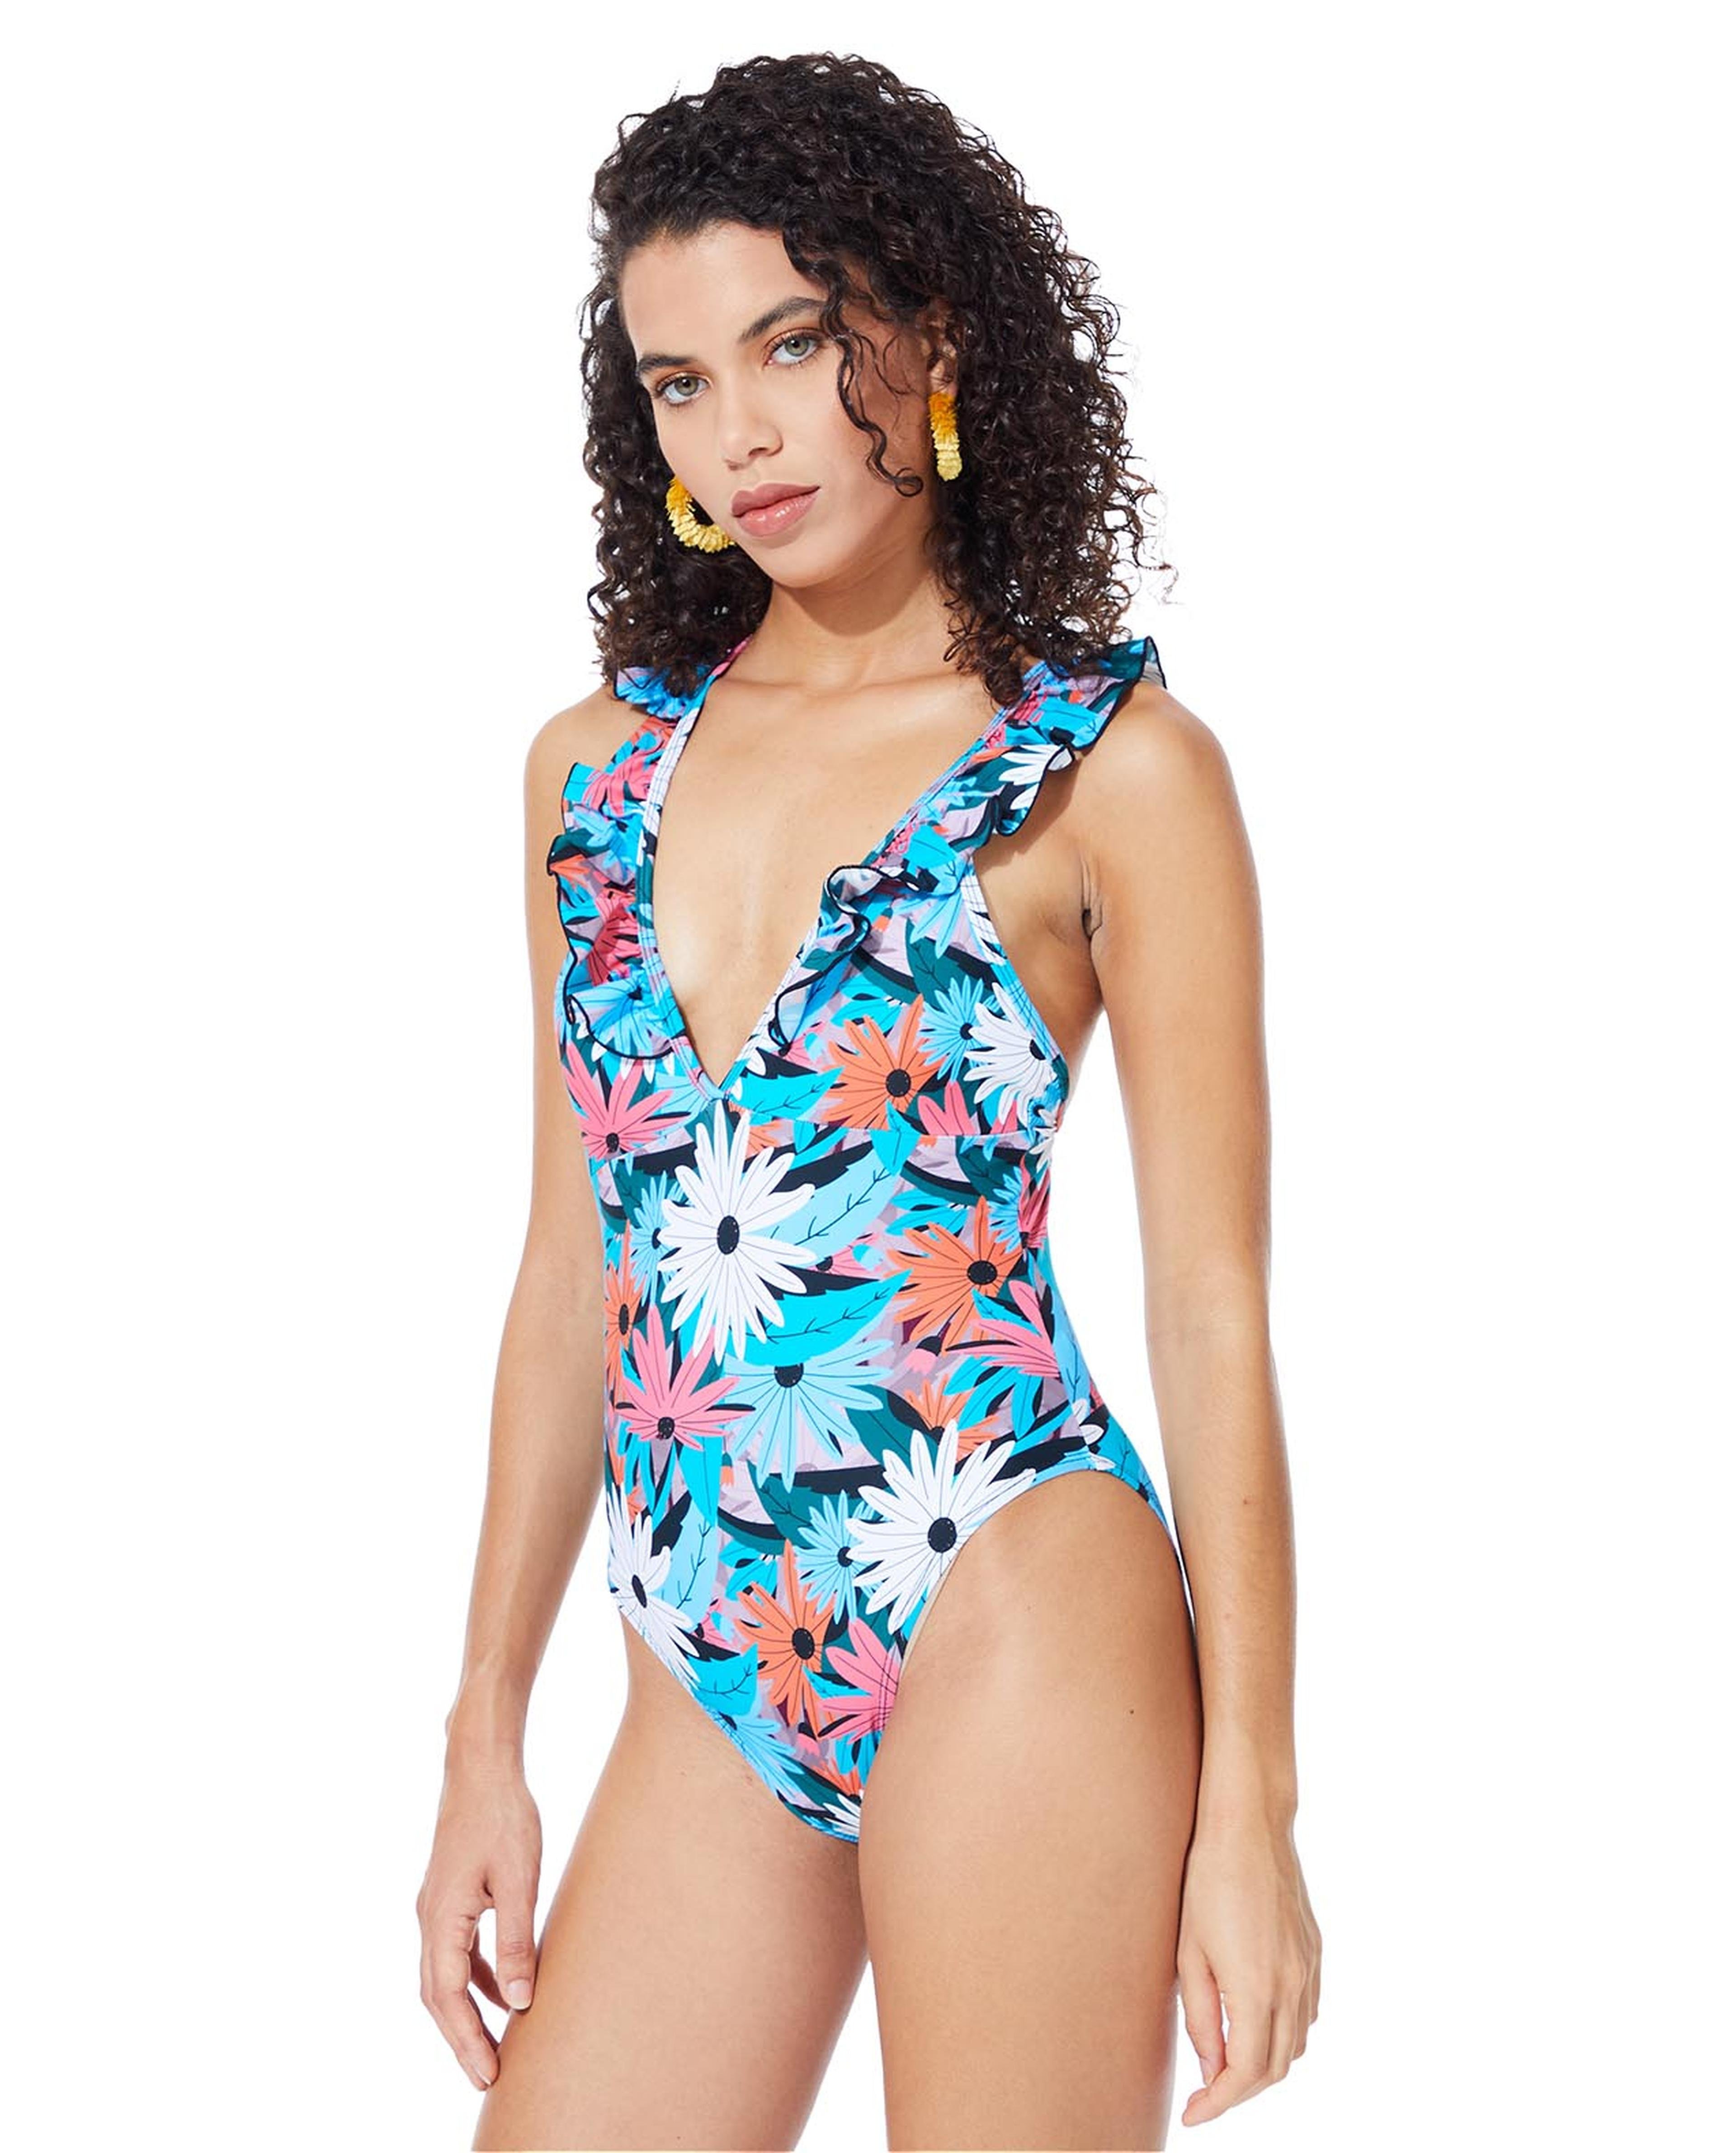 Floral Print One-Piece Swimsuit